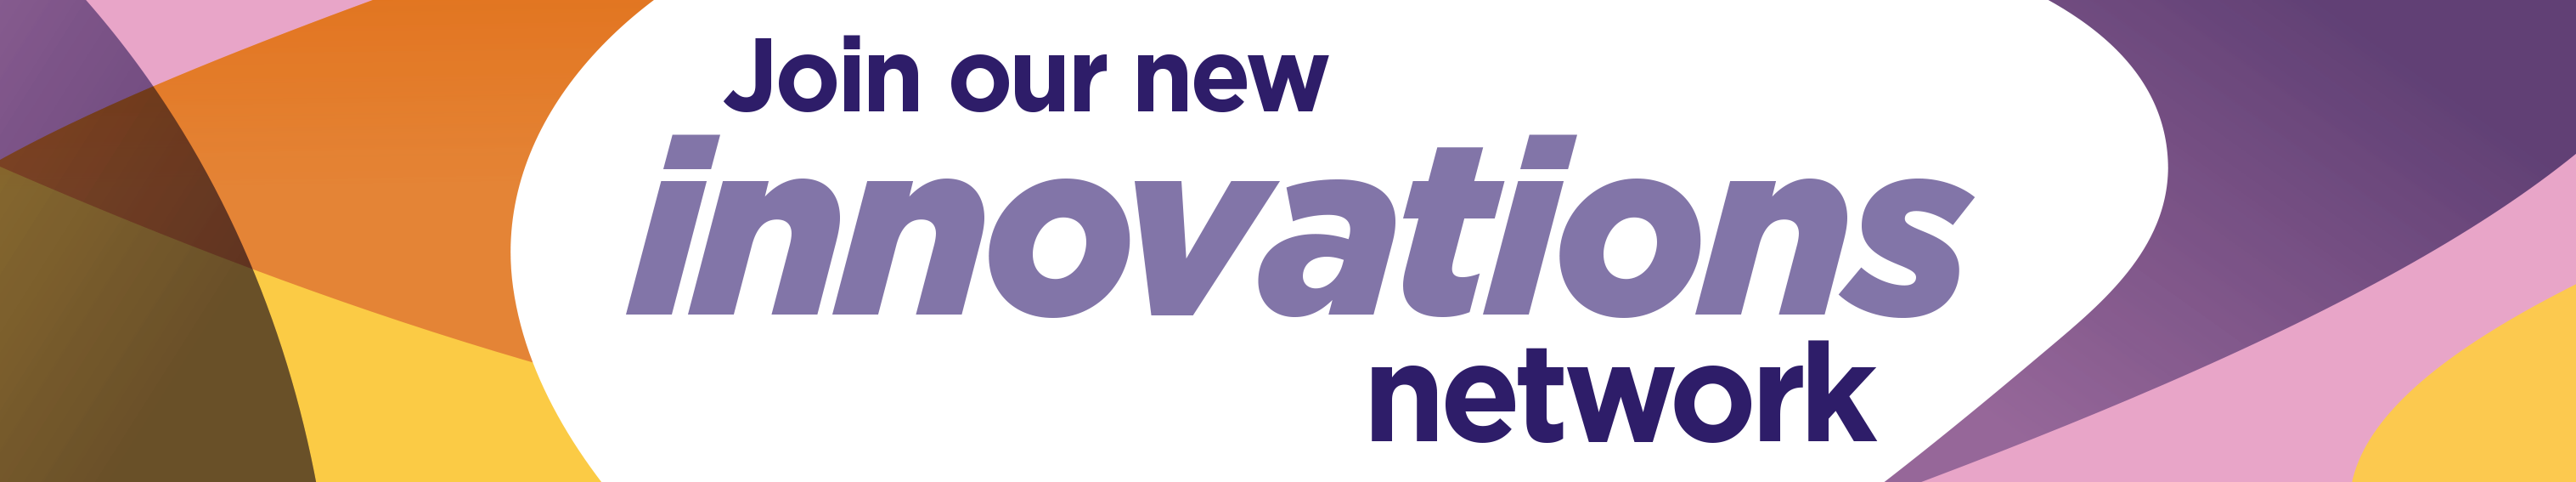 Join our new innovations network